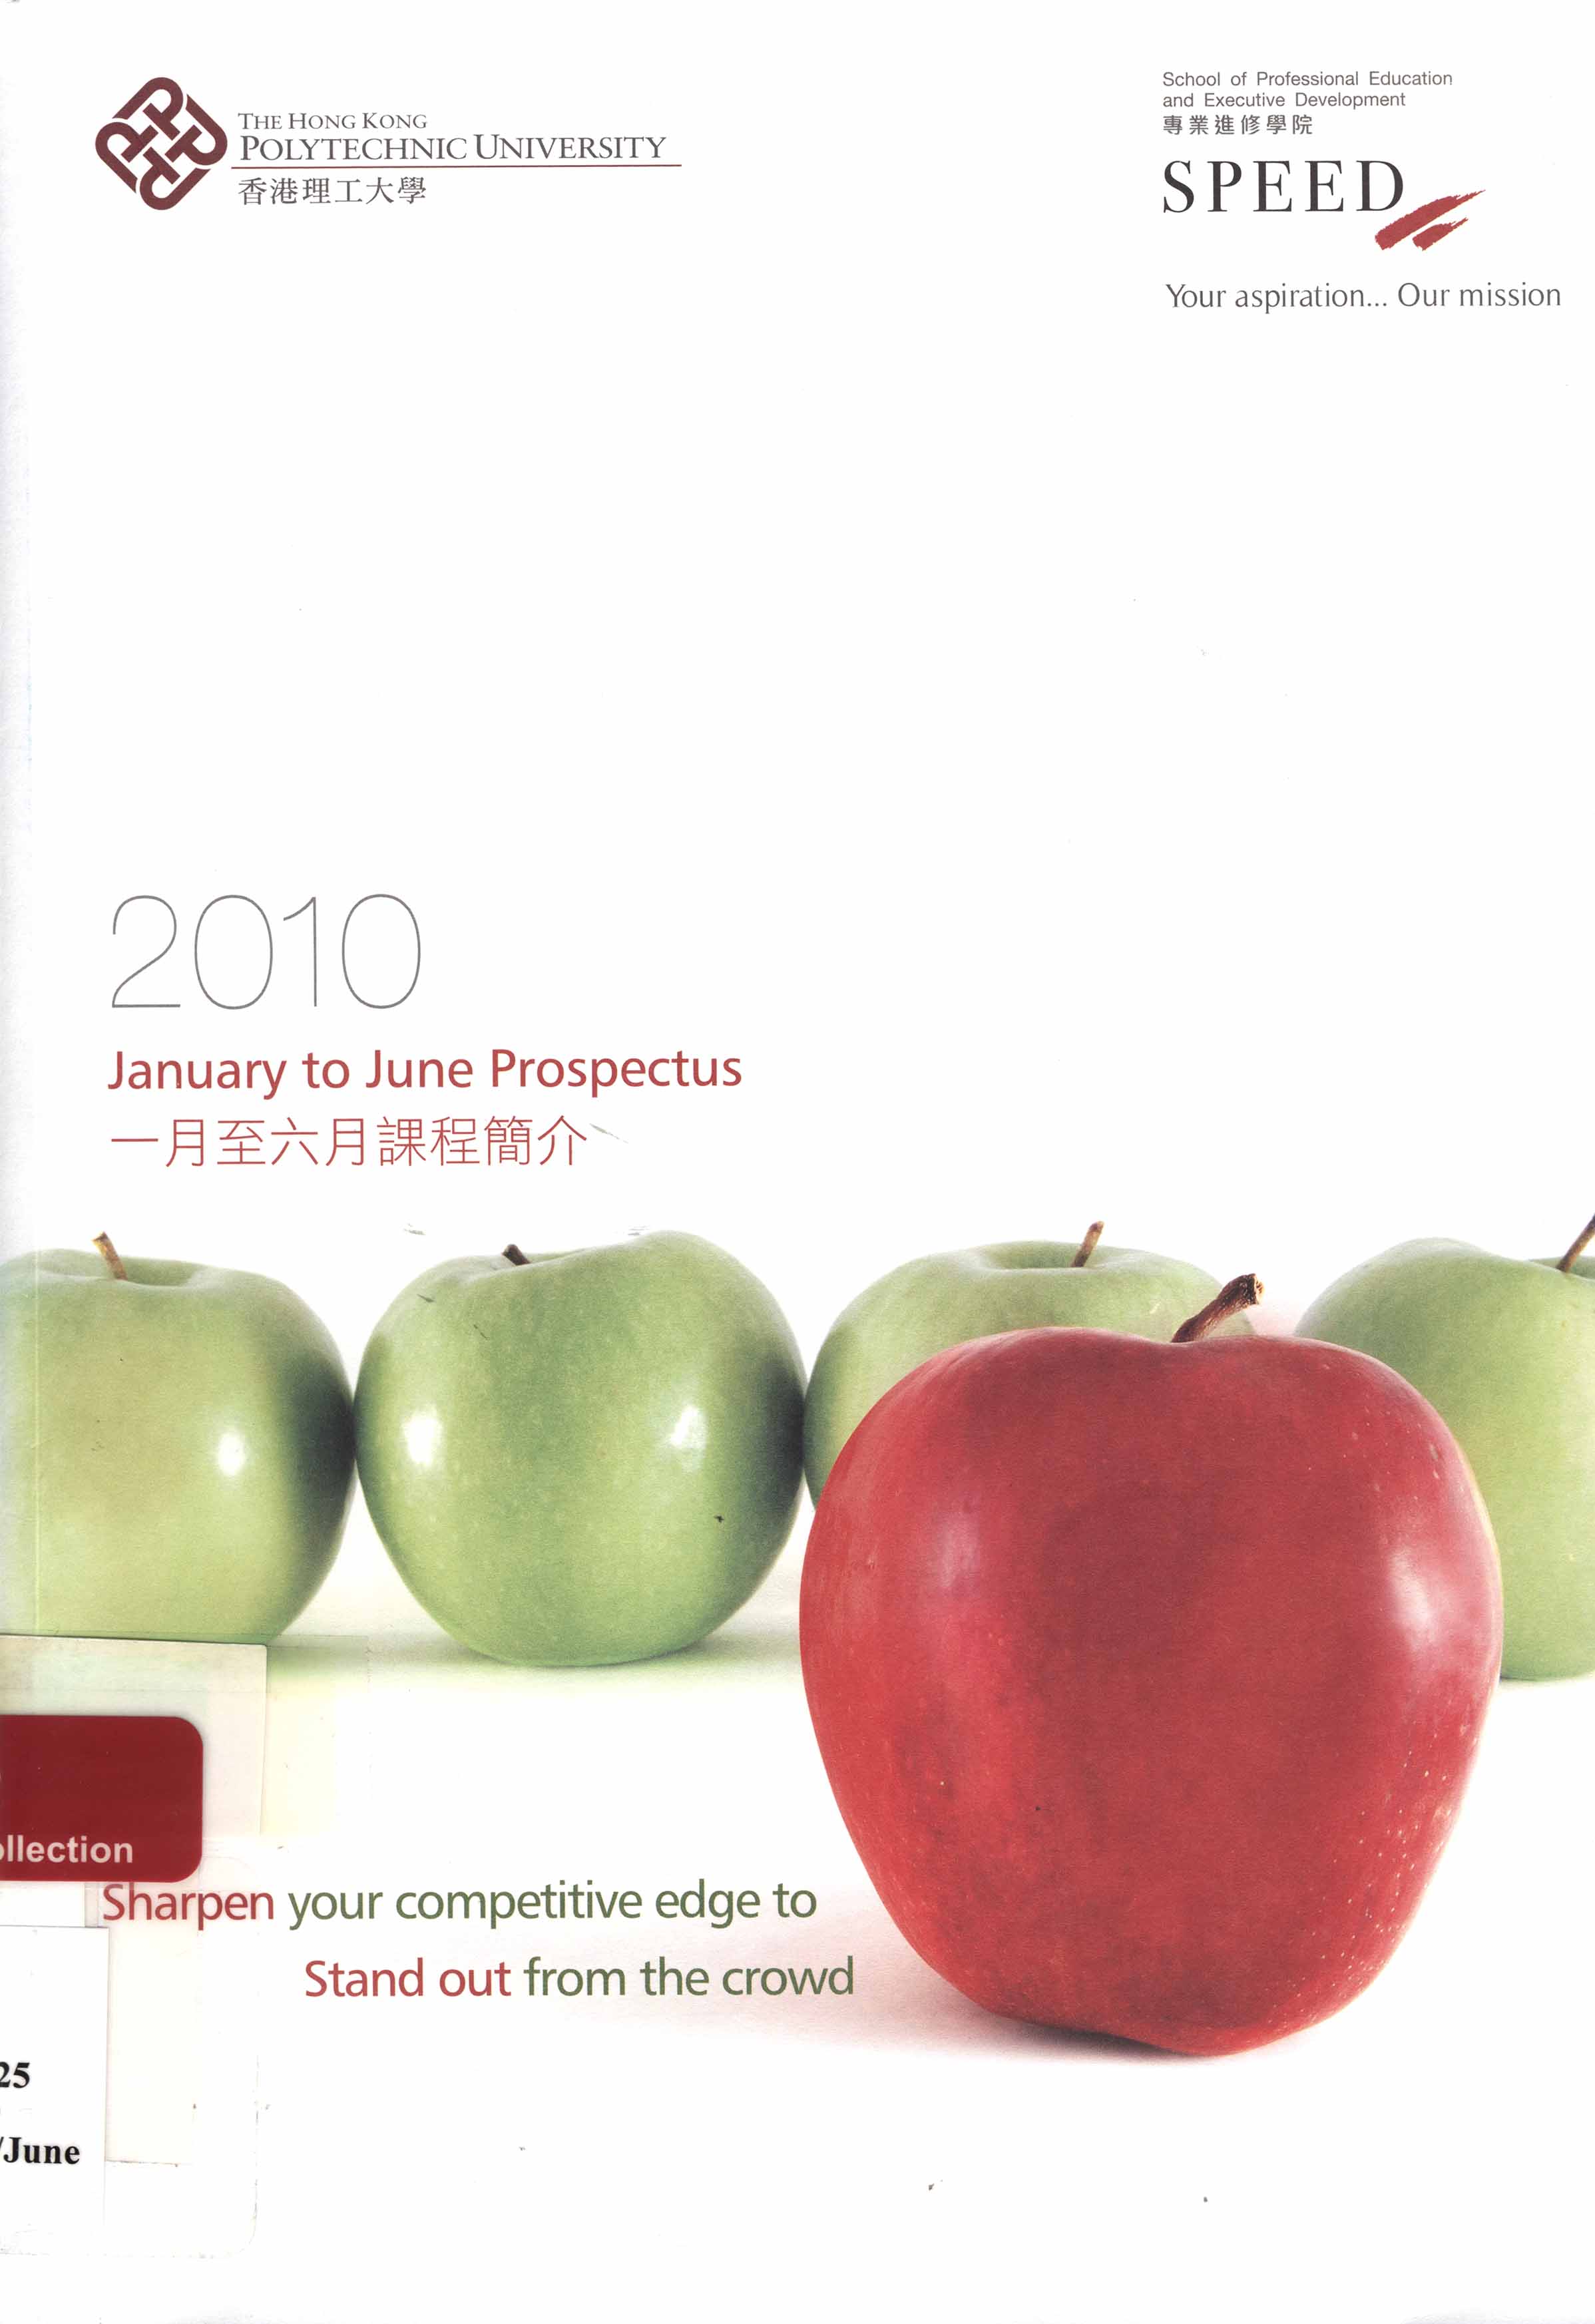 Prospectus [School of Professional Education and Executive Development (SPEED) - January to June 2010]